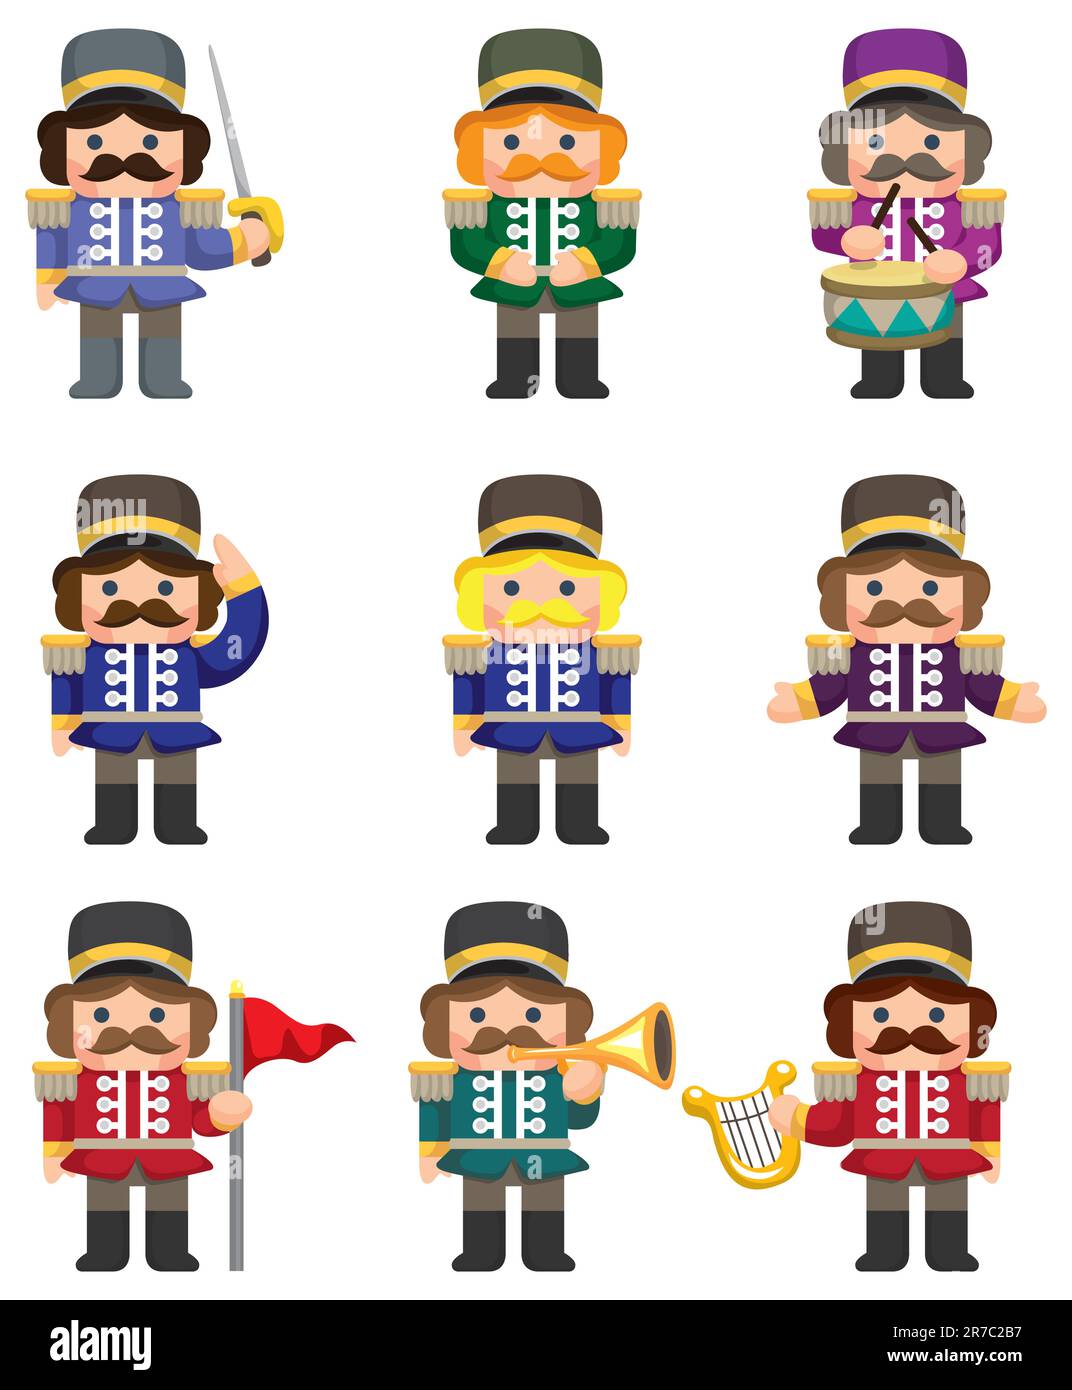 cartoon Toy soldiers icon Stock Vector